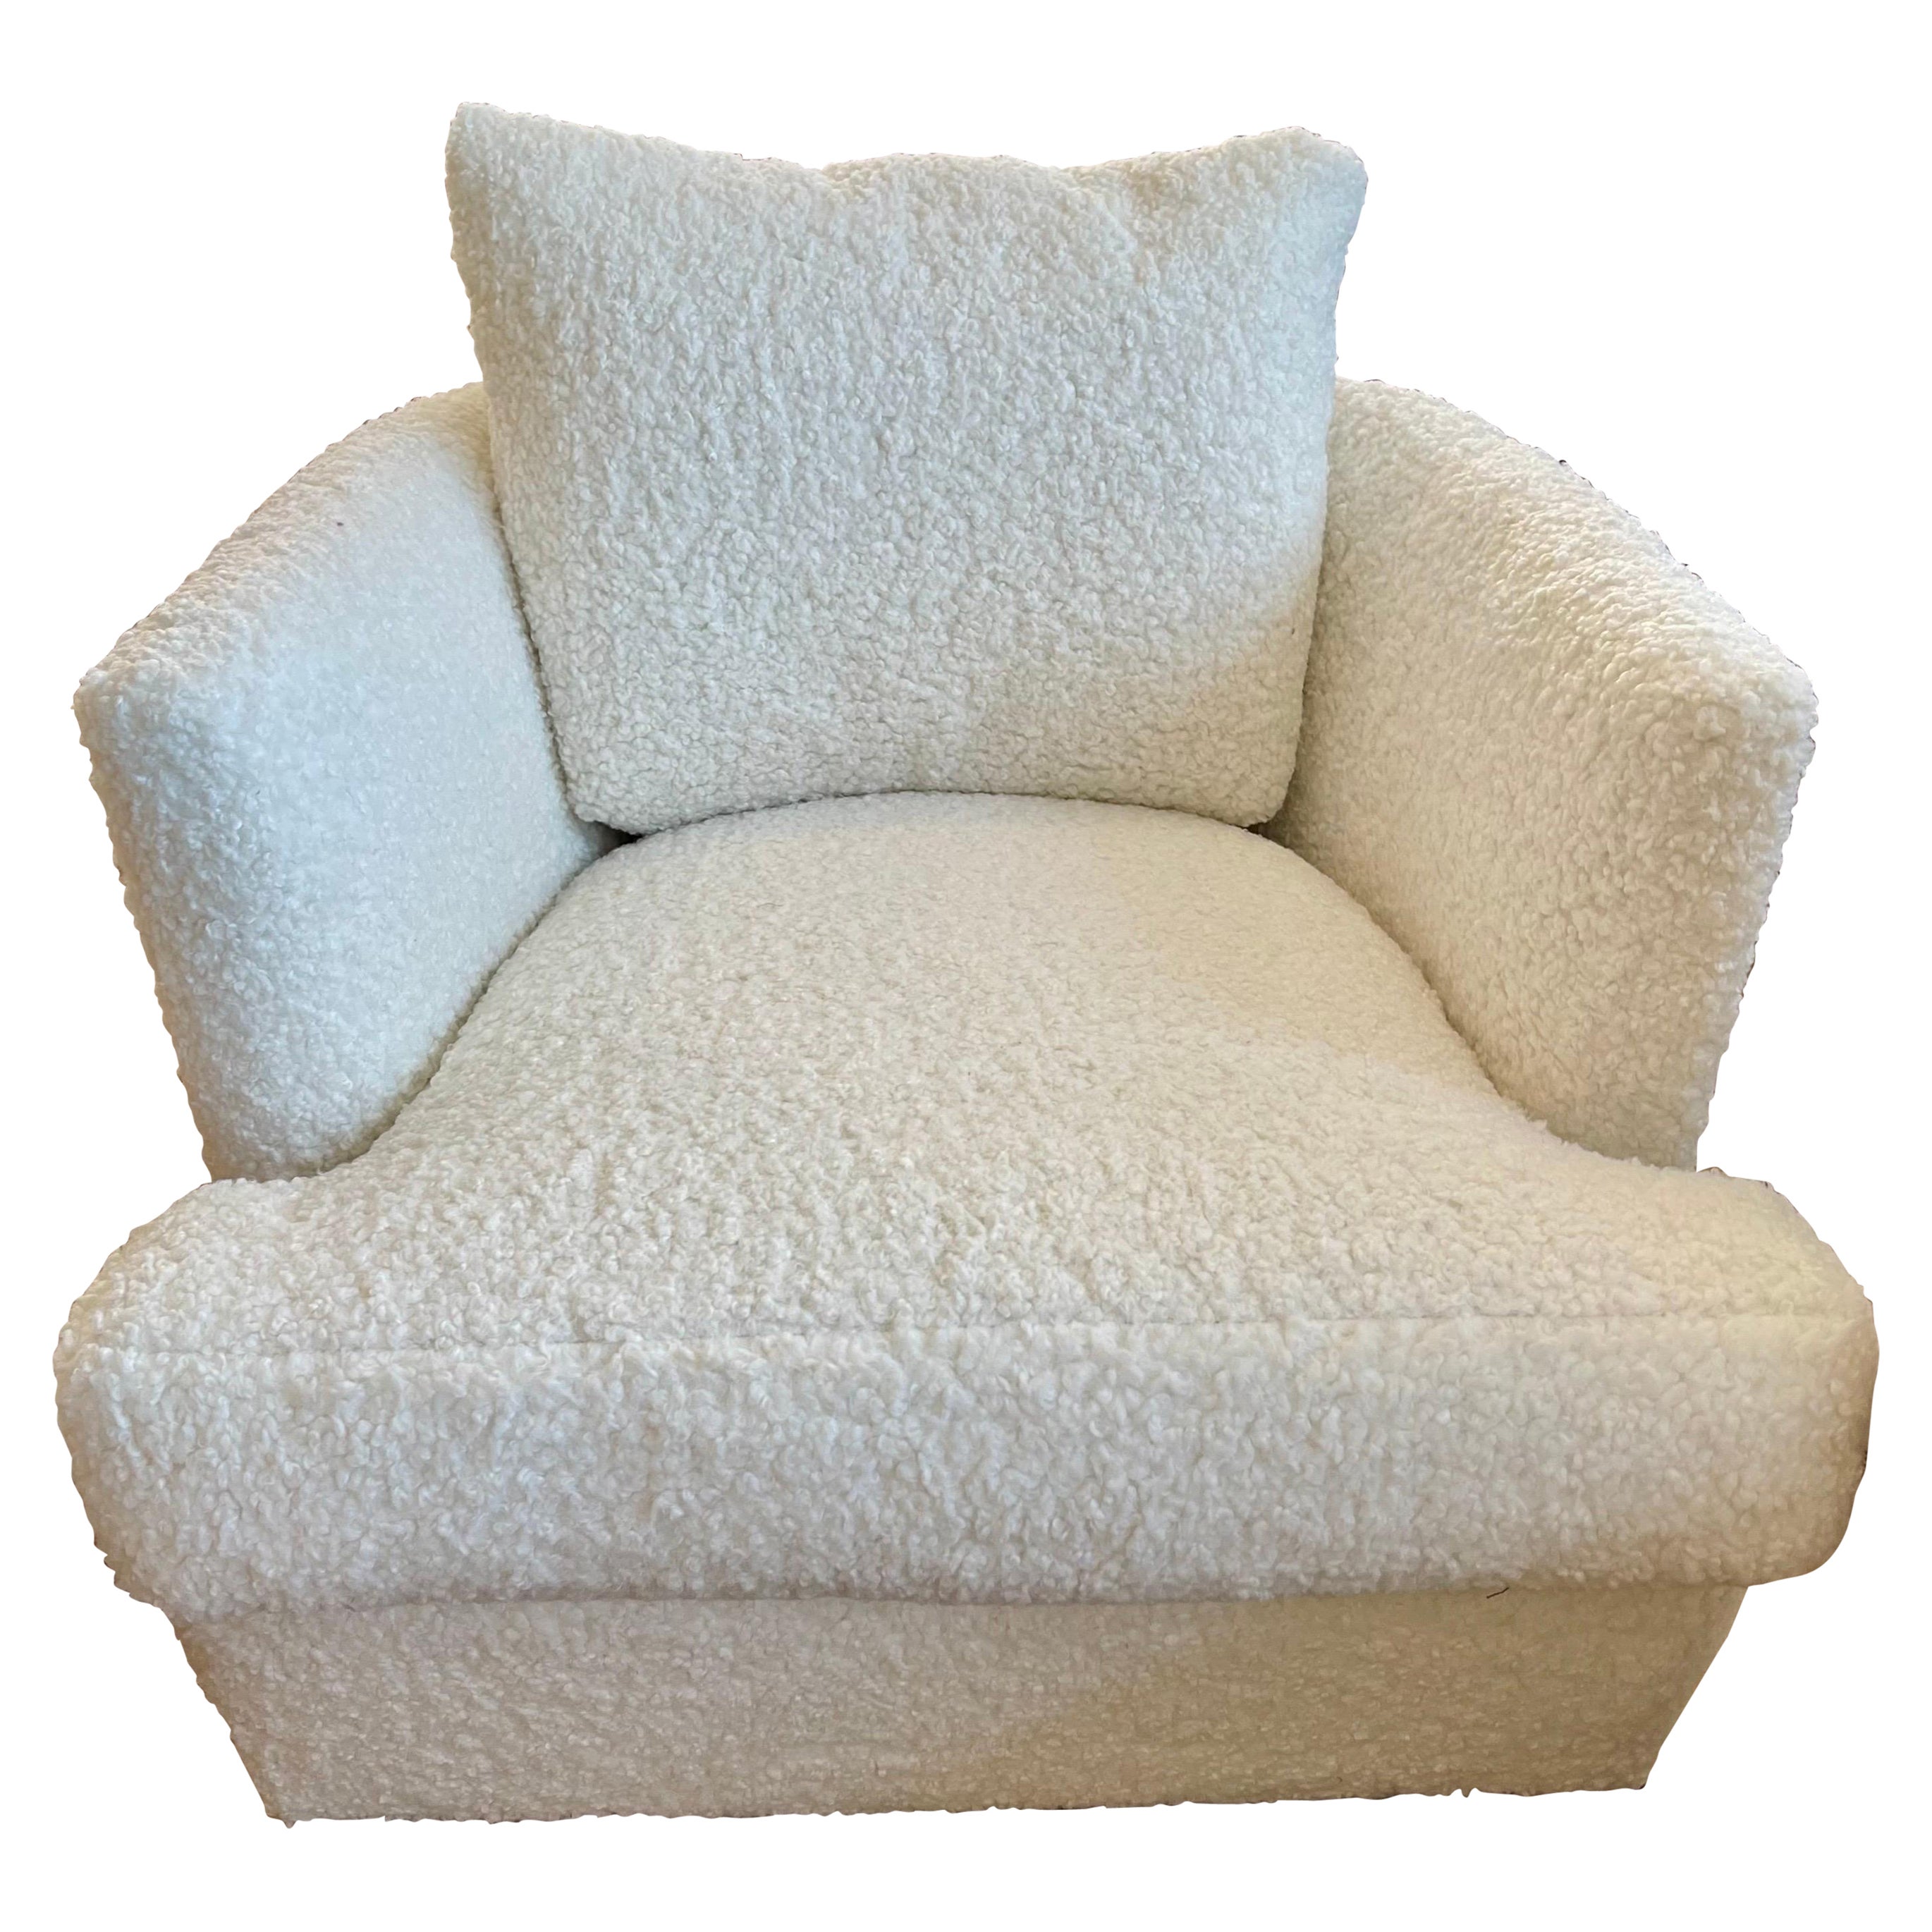 Mid-Century Modern Club Chair Newly Upholstered in Cream Boucle Fabric